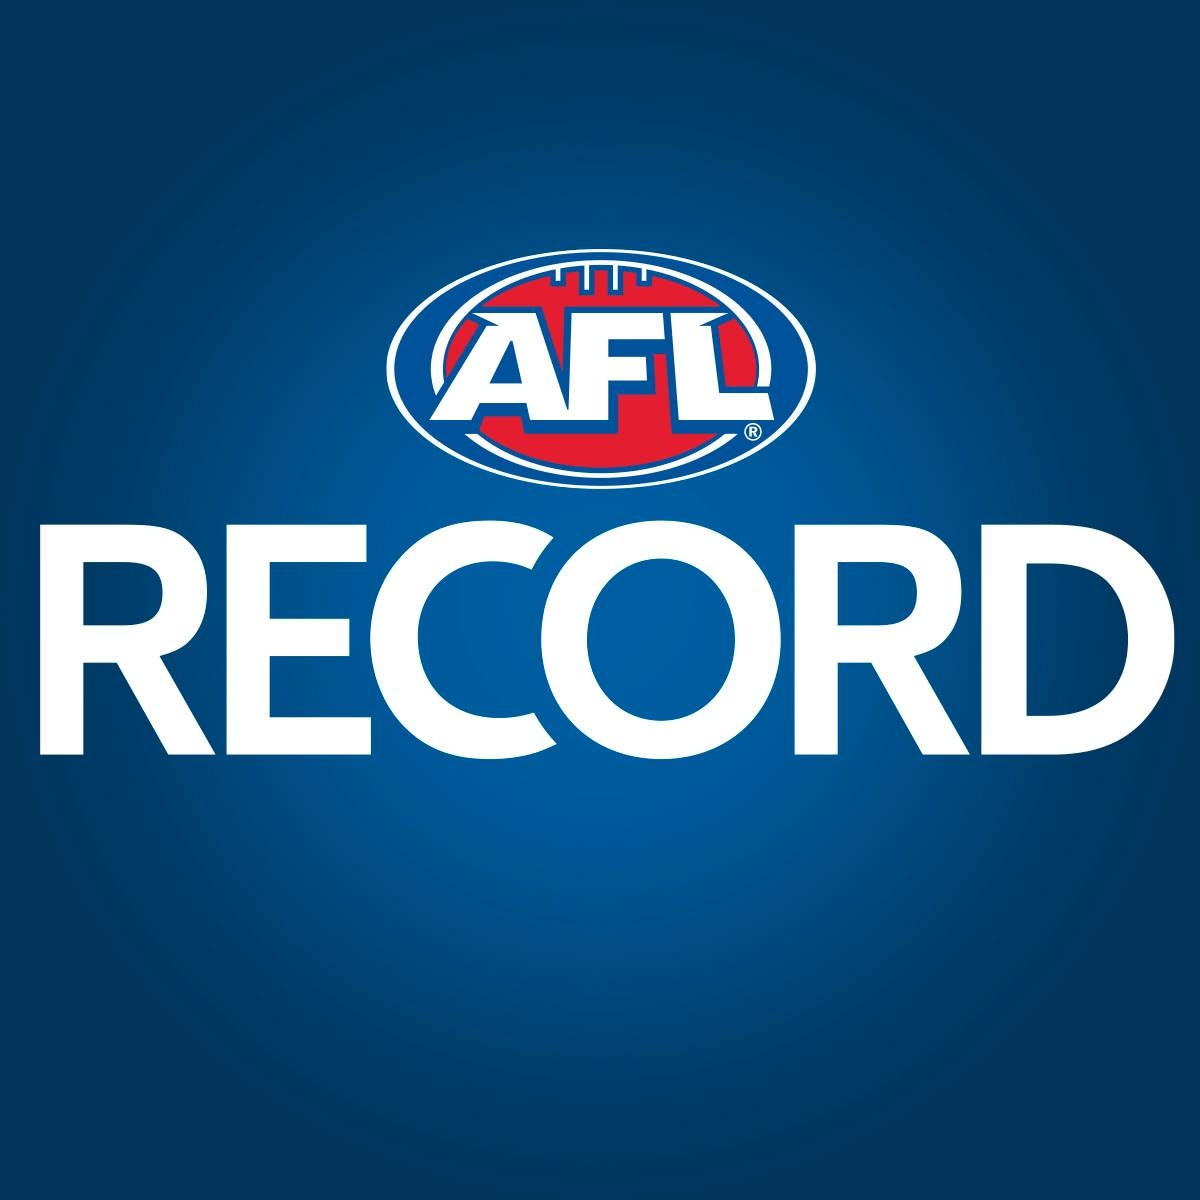 Readings from this week's AFL Record (Round 23)